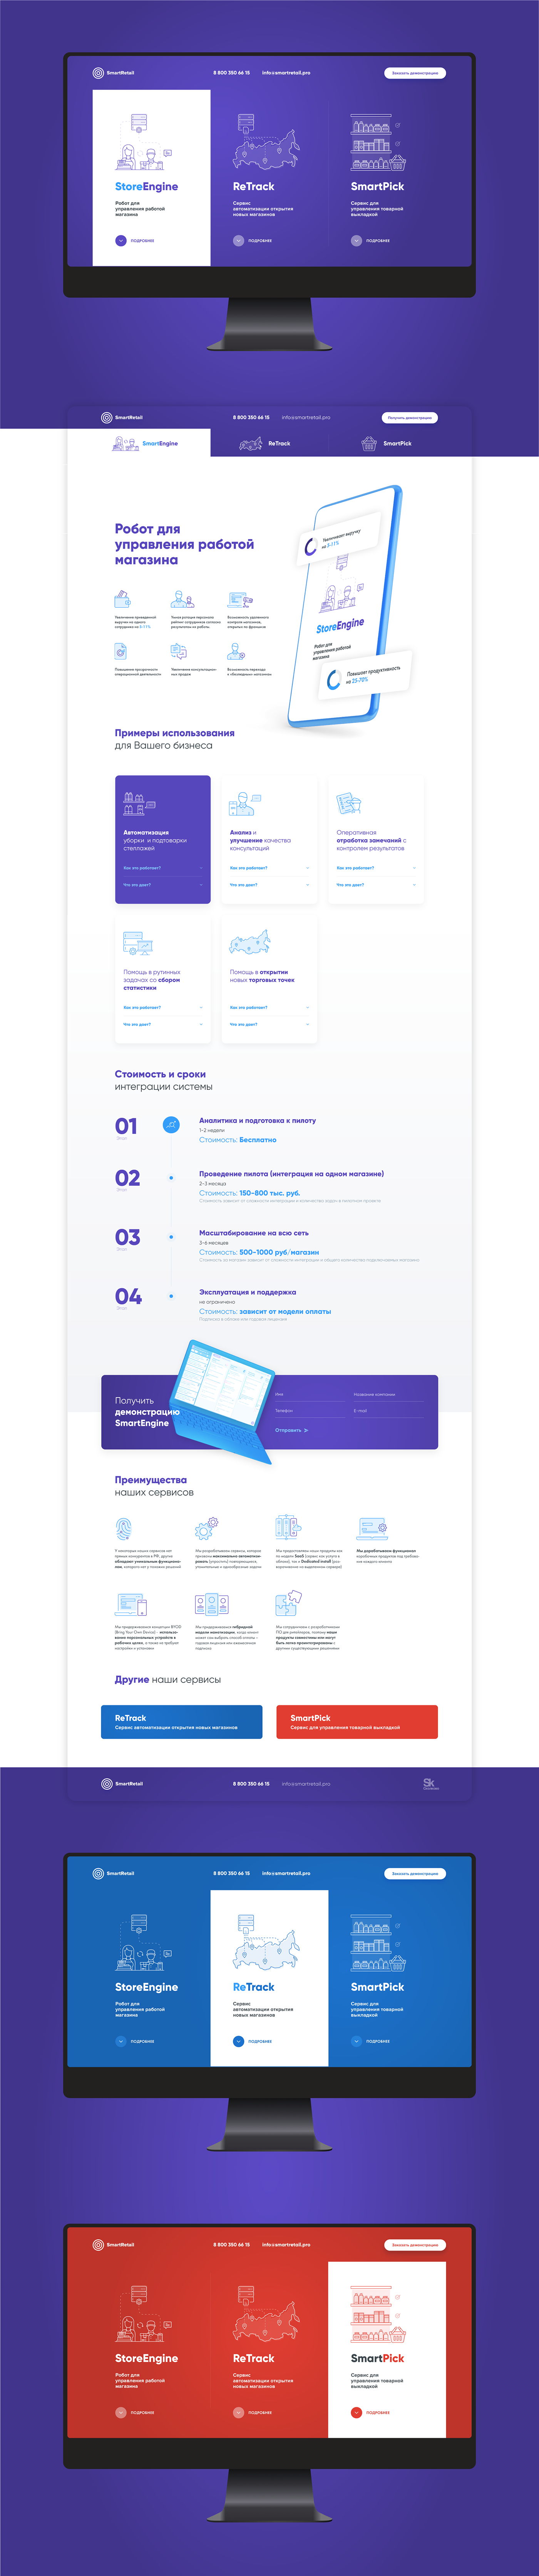 Pricing page example #670: SmartRetail